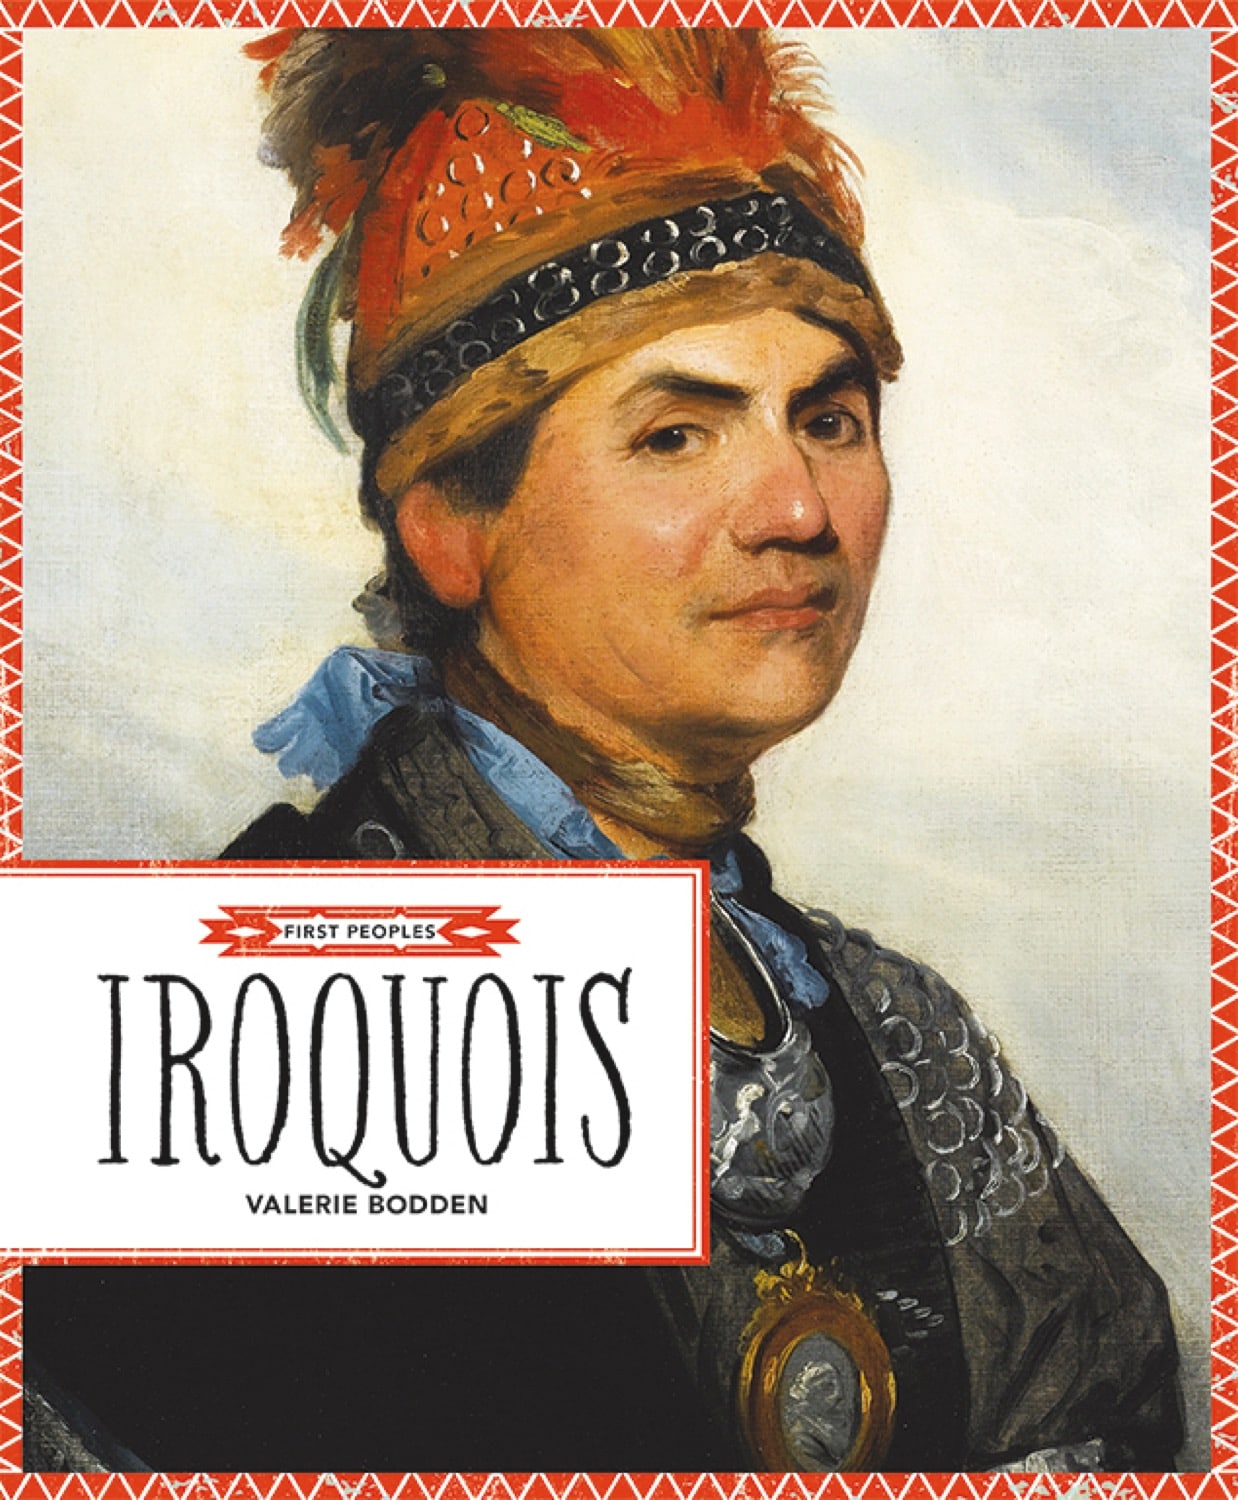 First Peoples: Iroquois